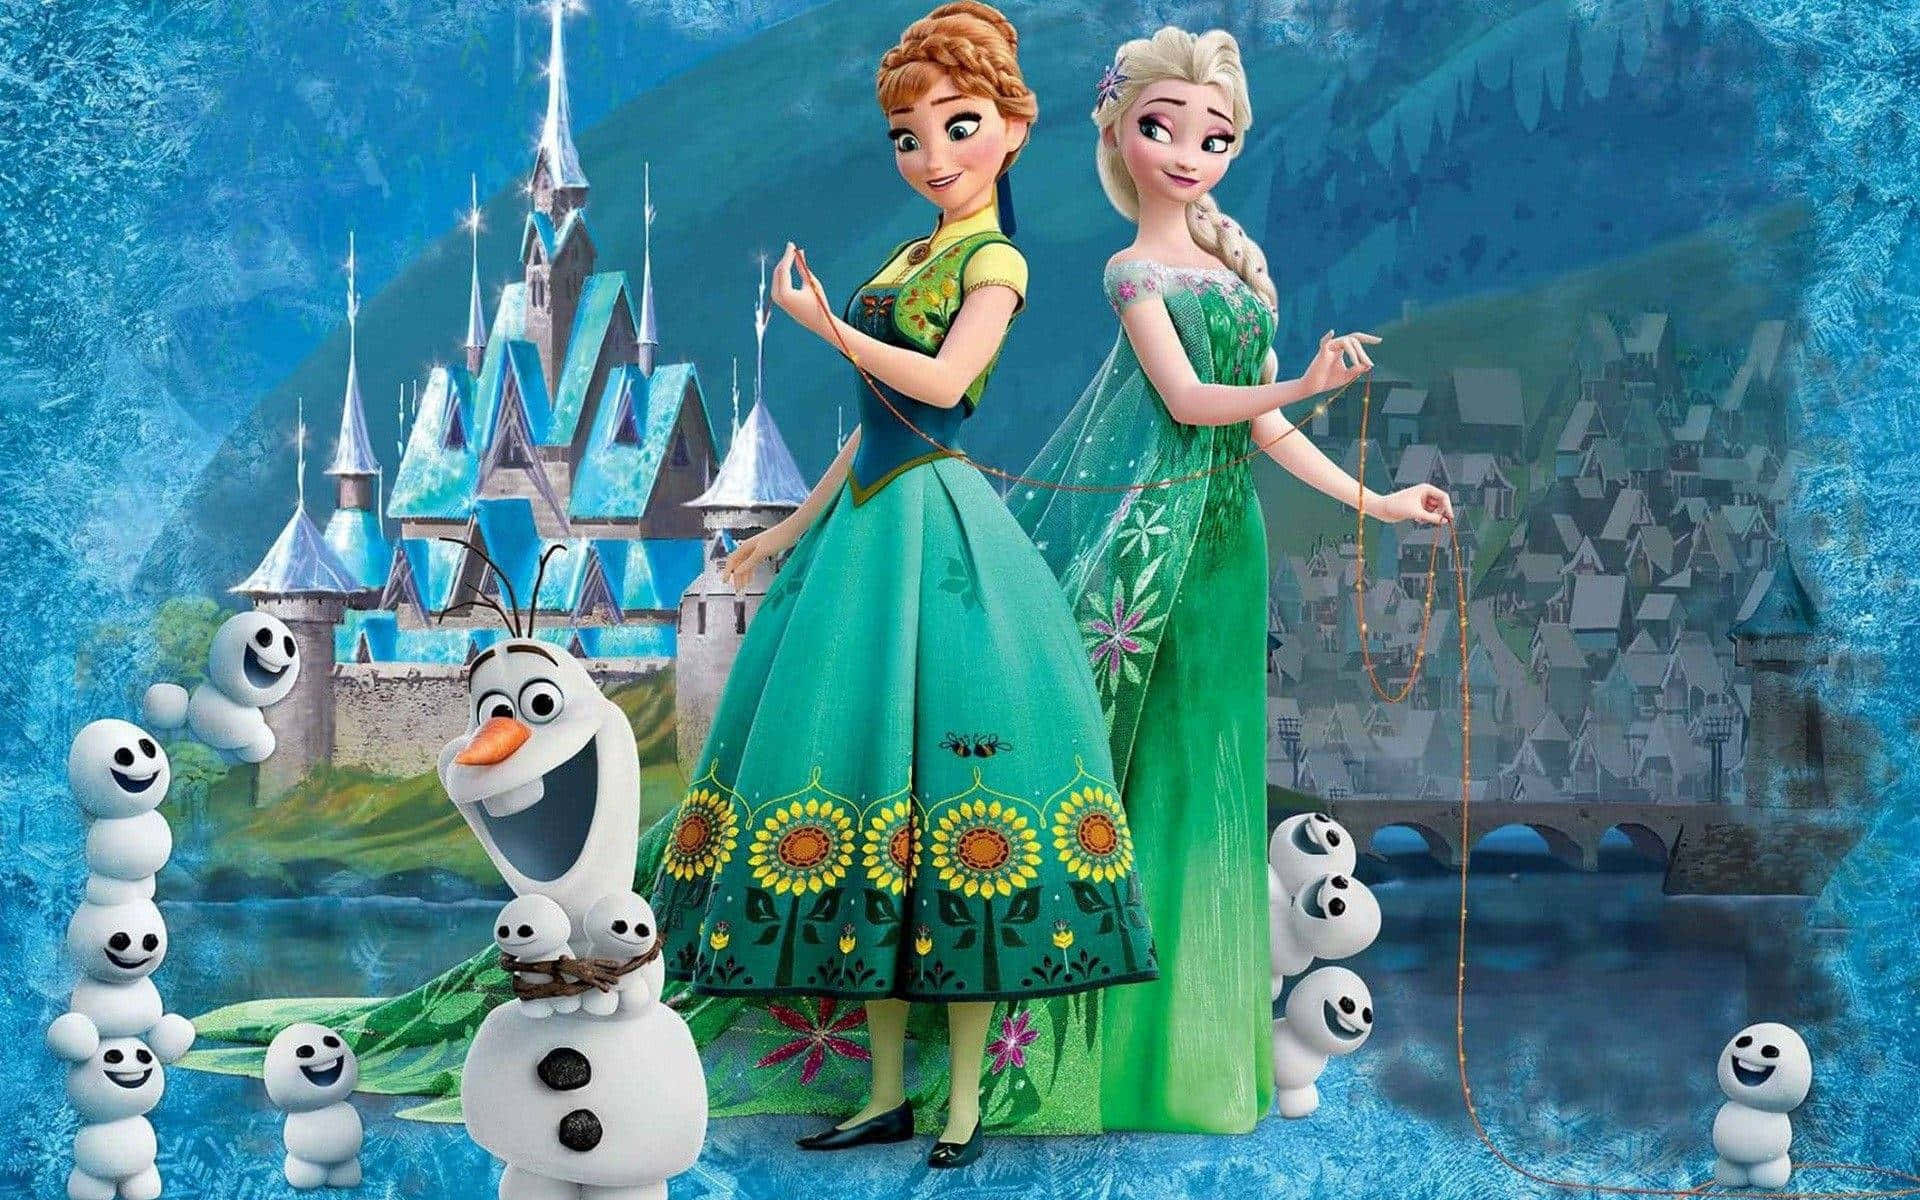 Sisters Anna and Elsa embrace in this stunning image from Disney's Frozen 2